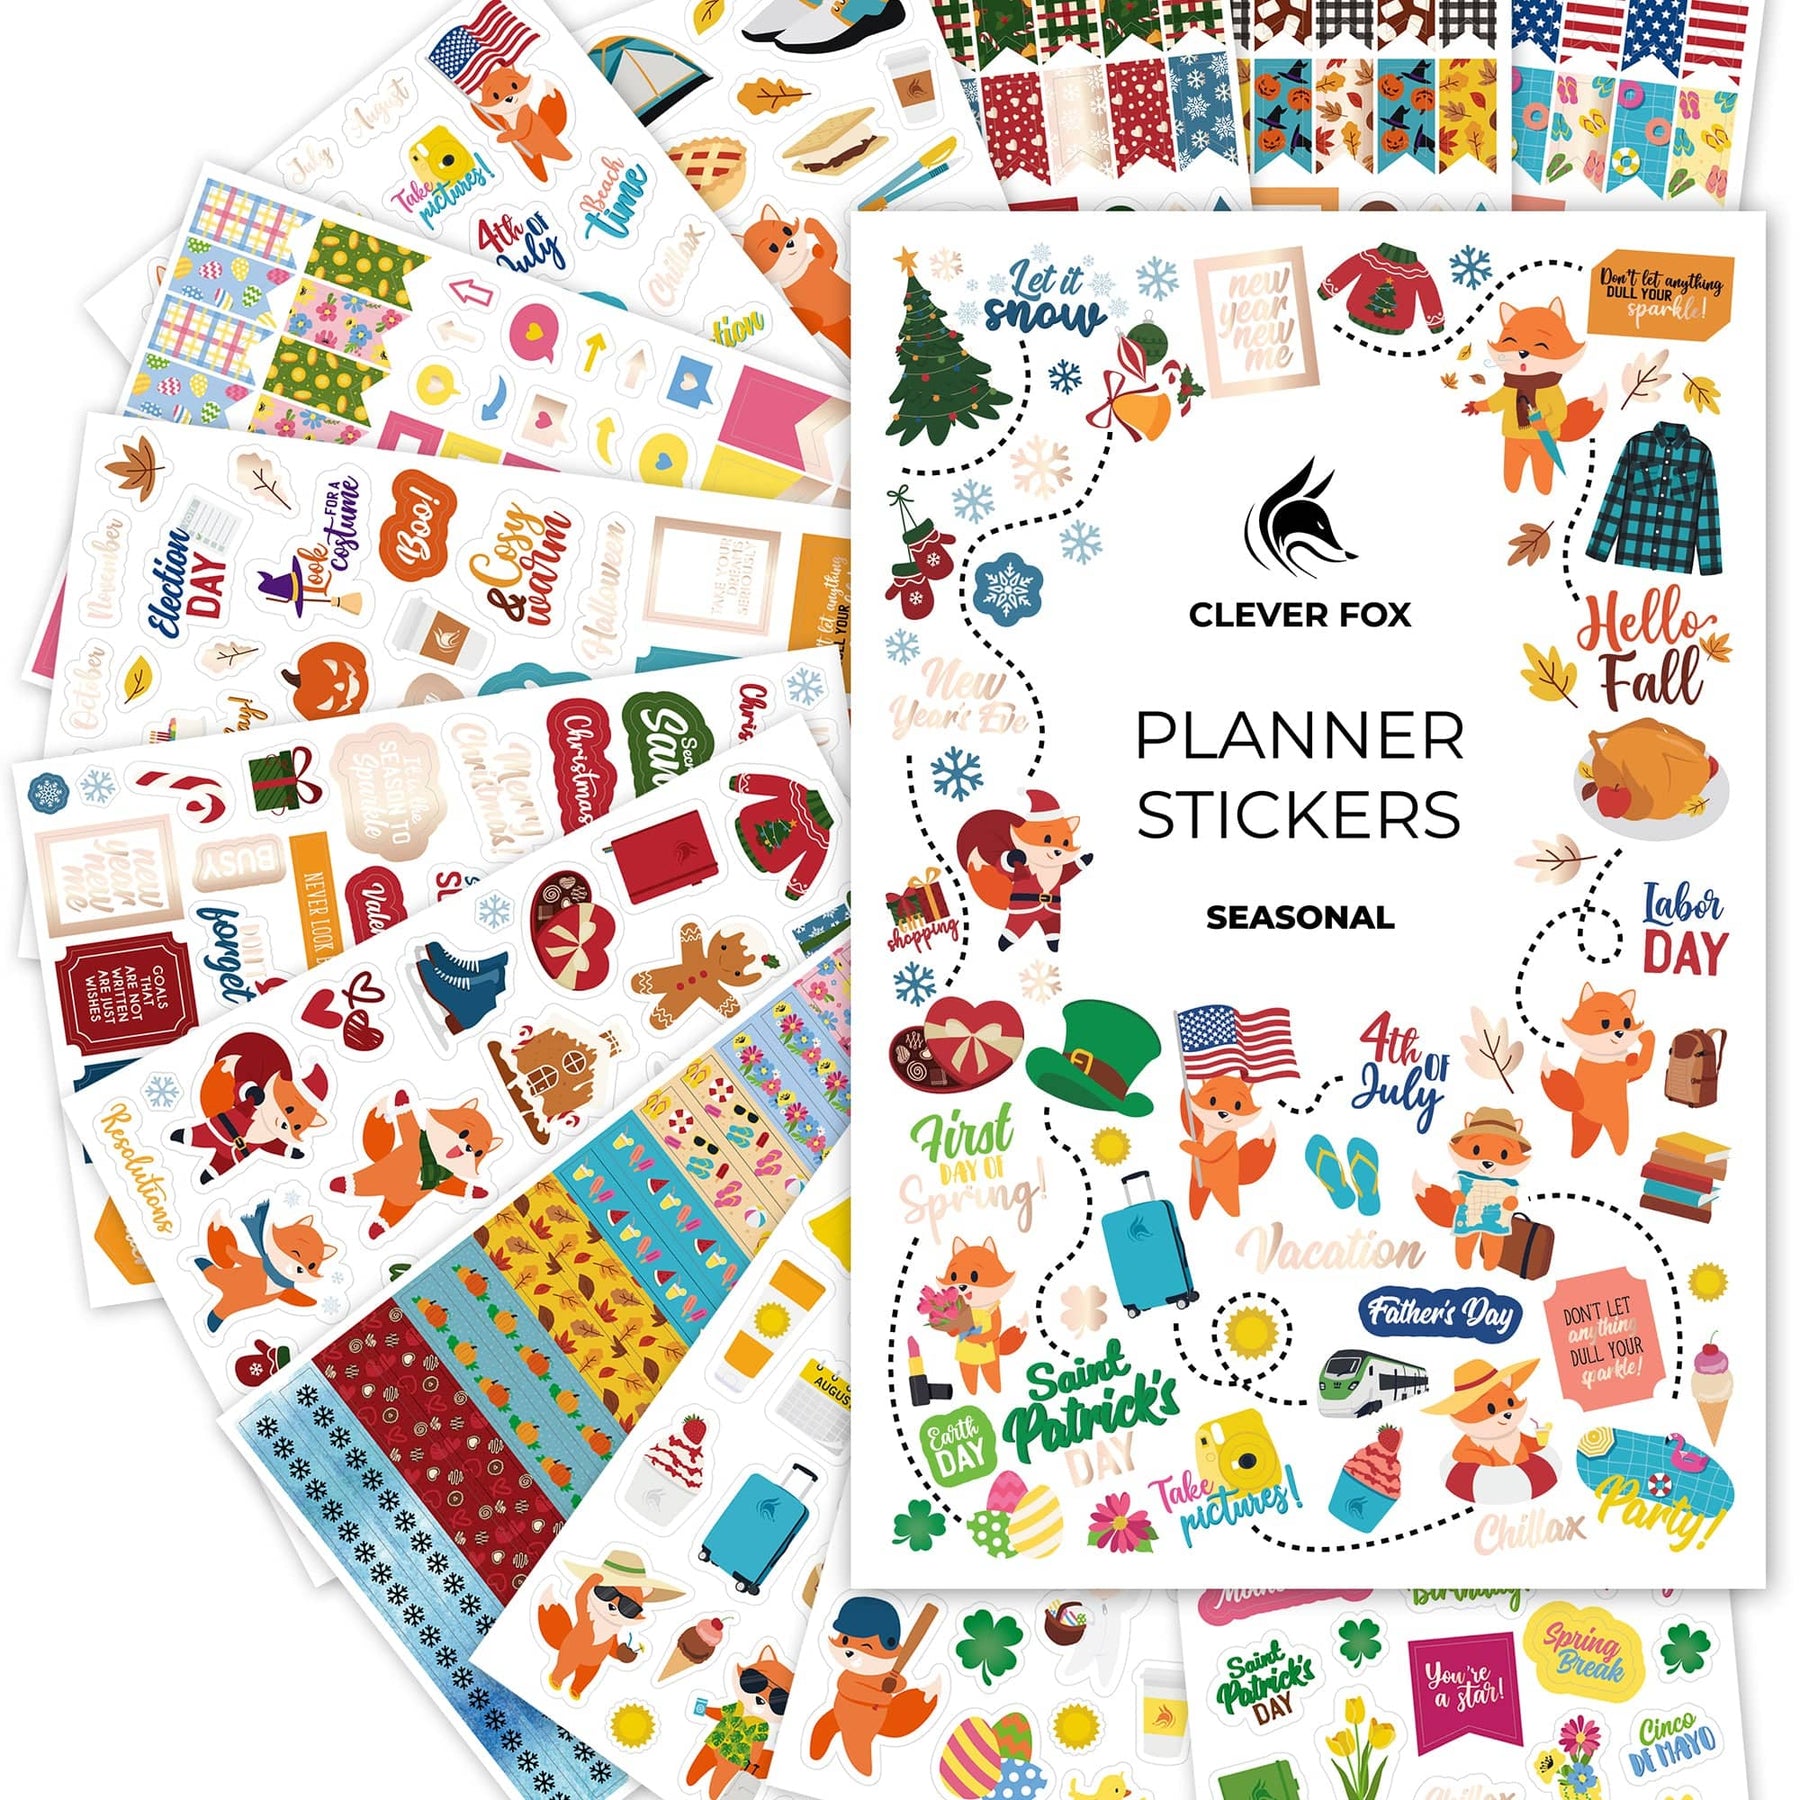 1200 Planner Stickers | Color: Gray | Size: Os | Carol's Closet